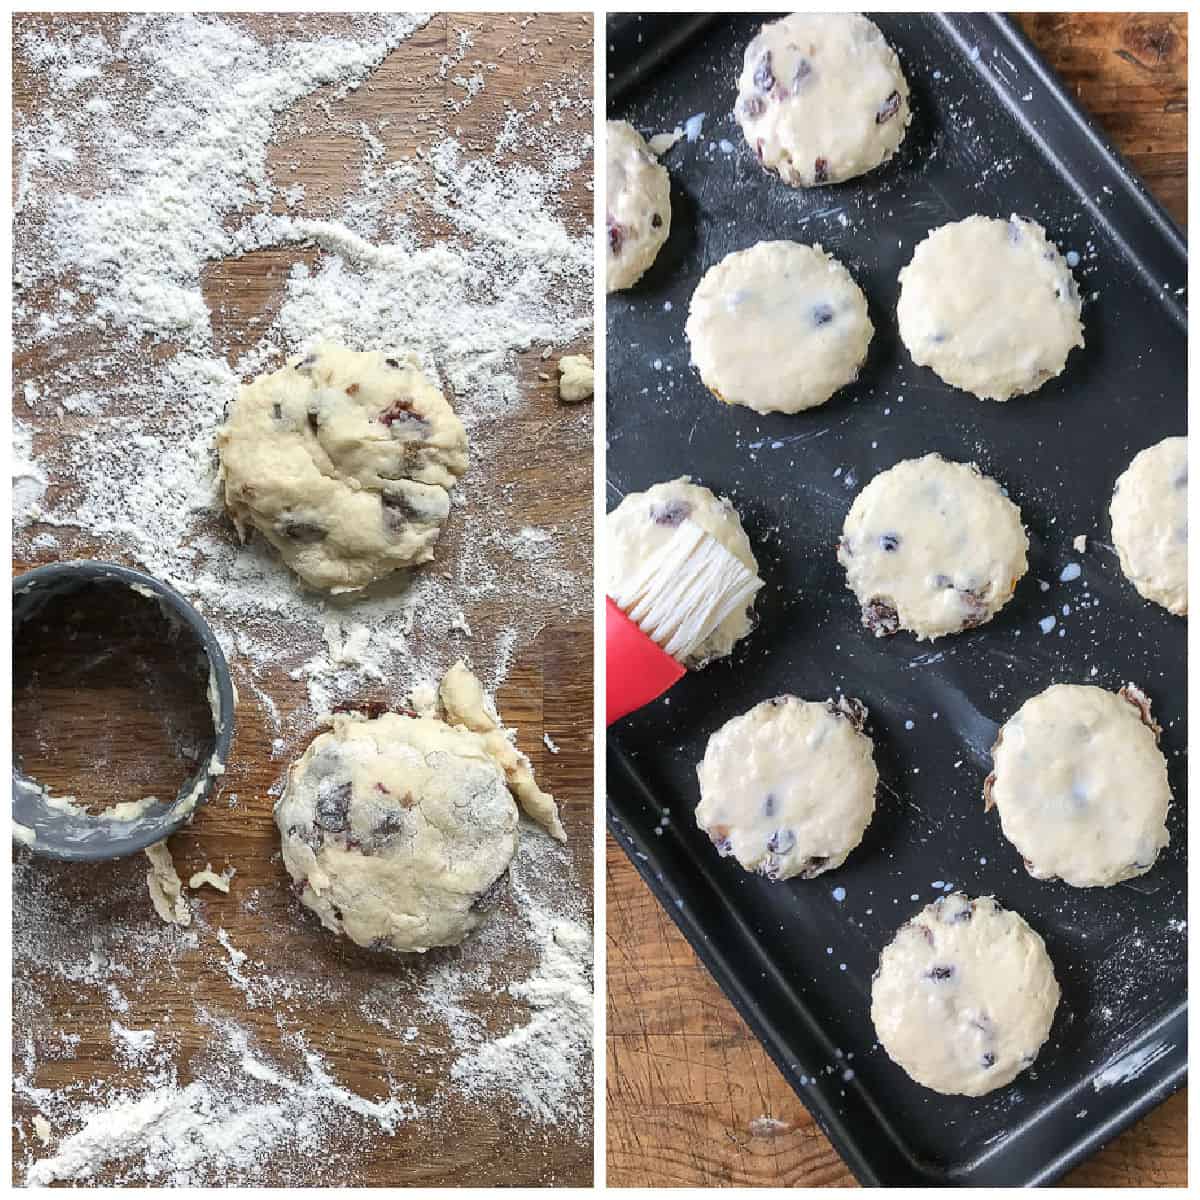 Rolling out the scones and placing onto a baking sheet.